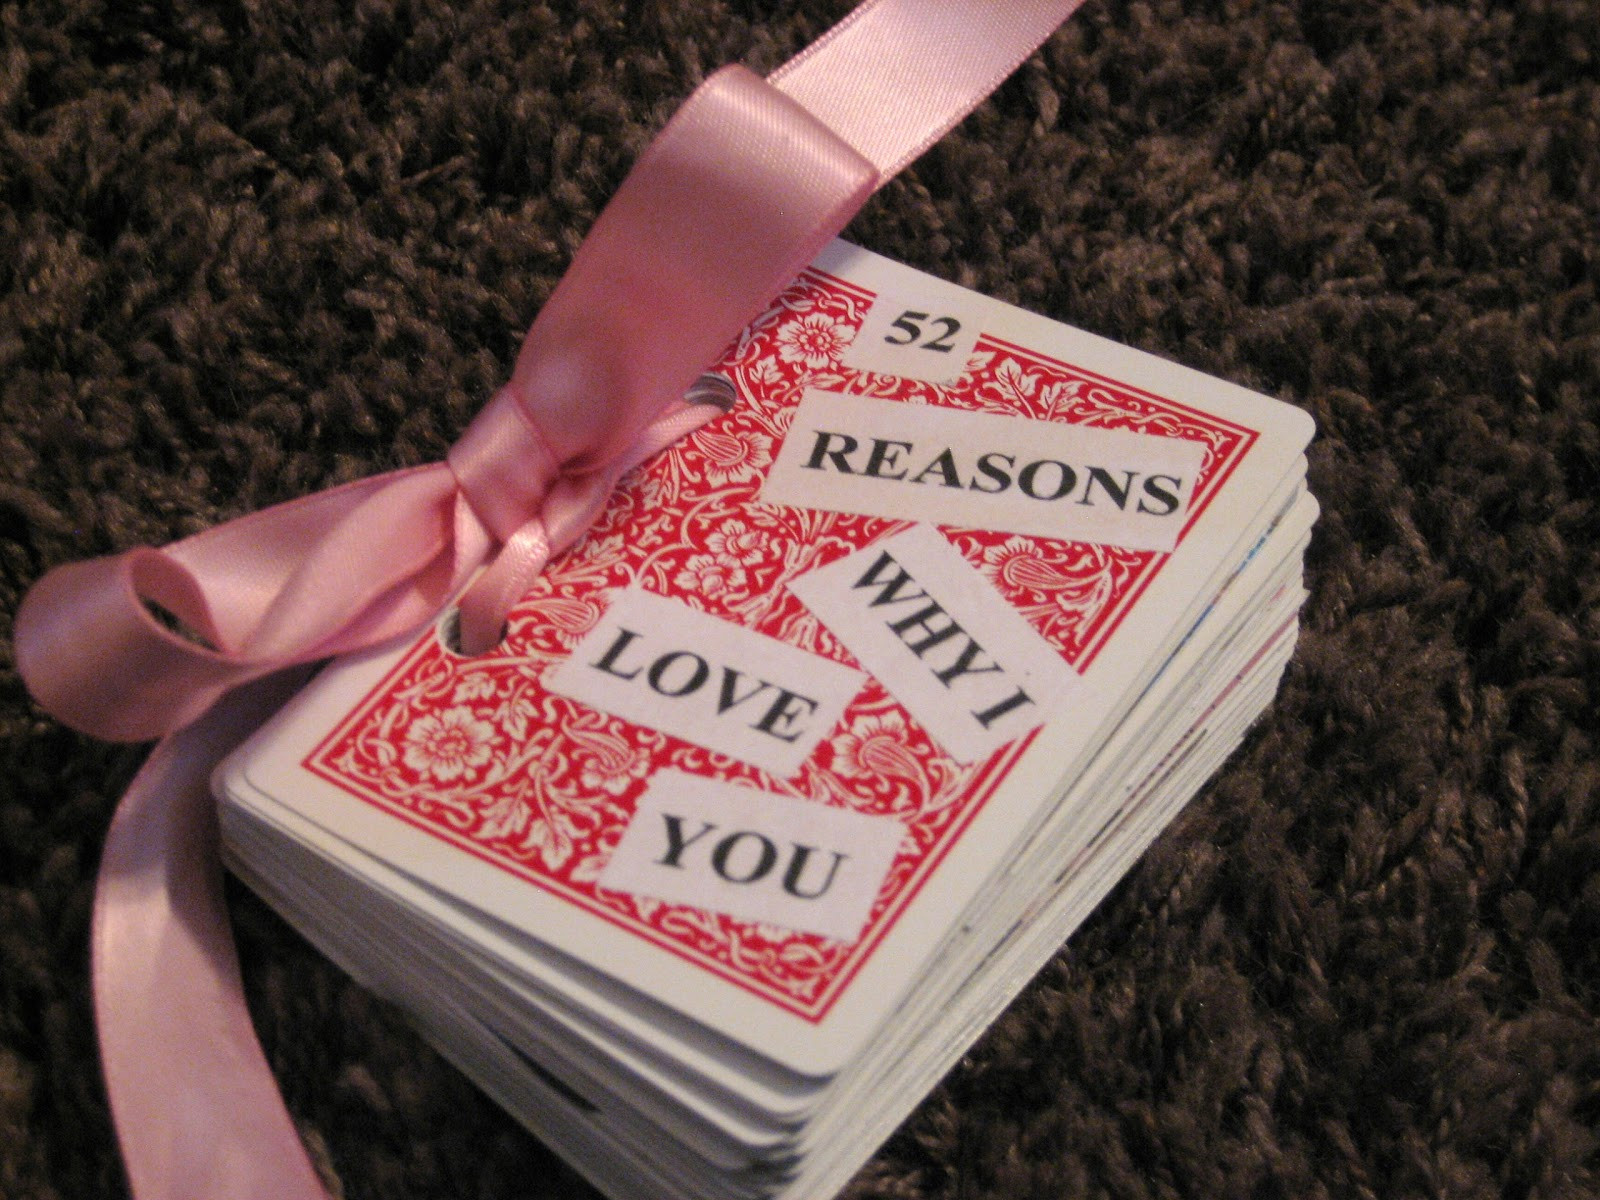 I Love You Gift Ideas For Girlfriend
 Sweet Peppermint Kisses 52 Reasons Why I Love You